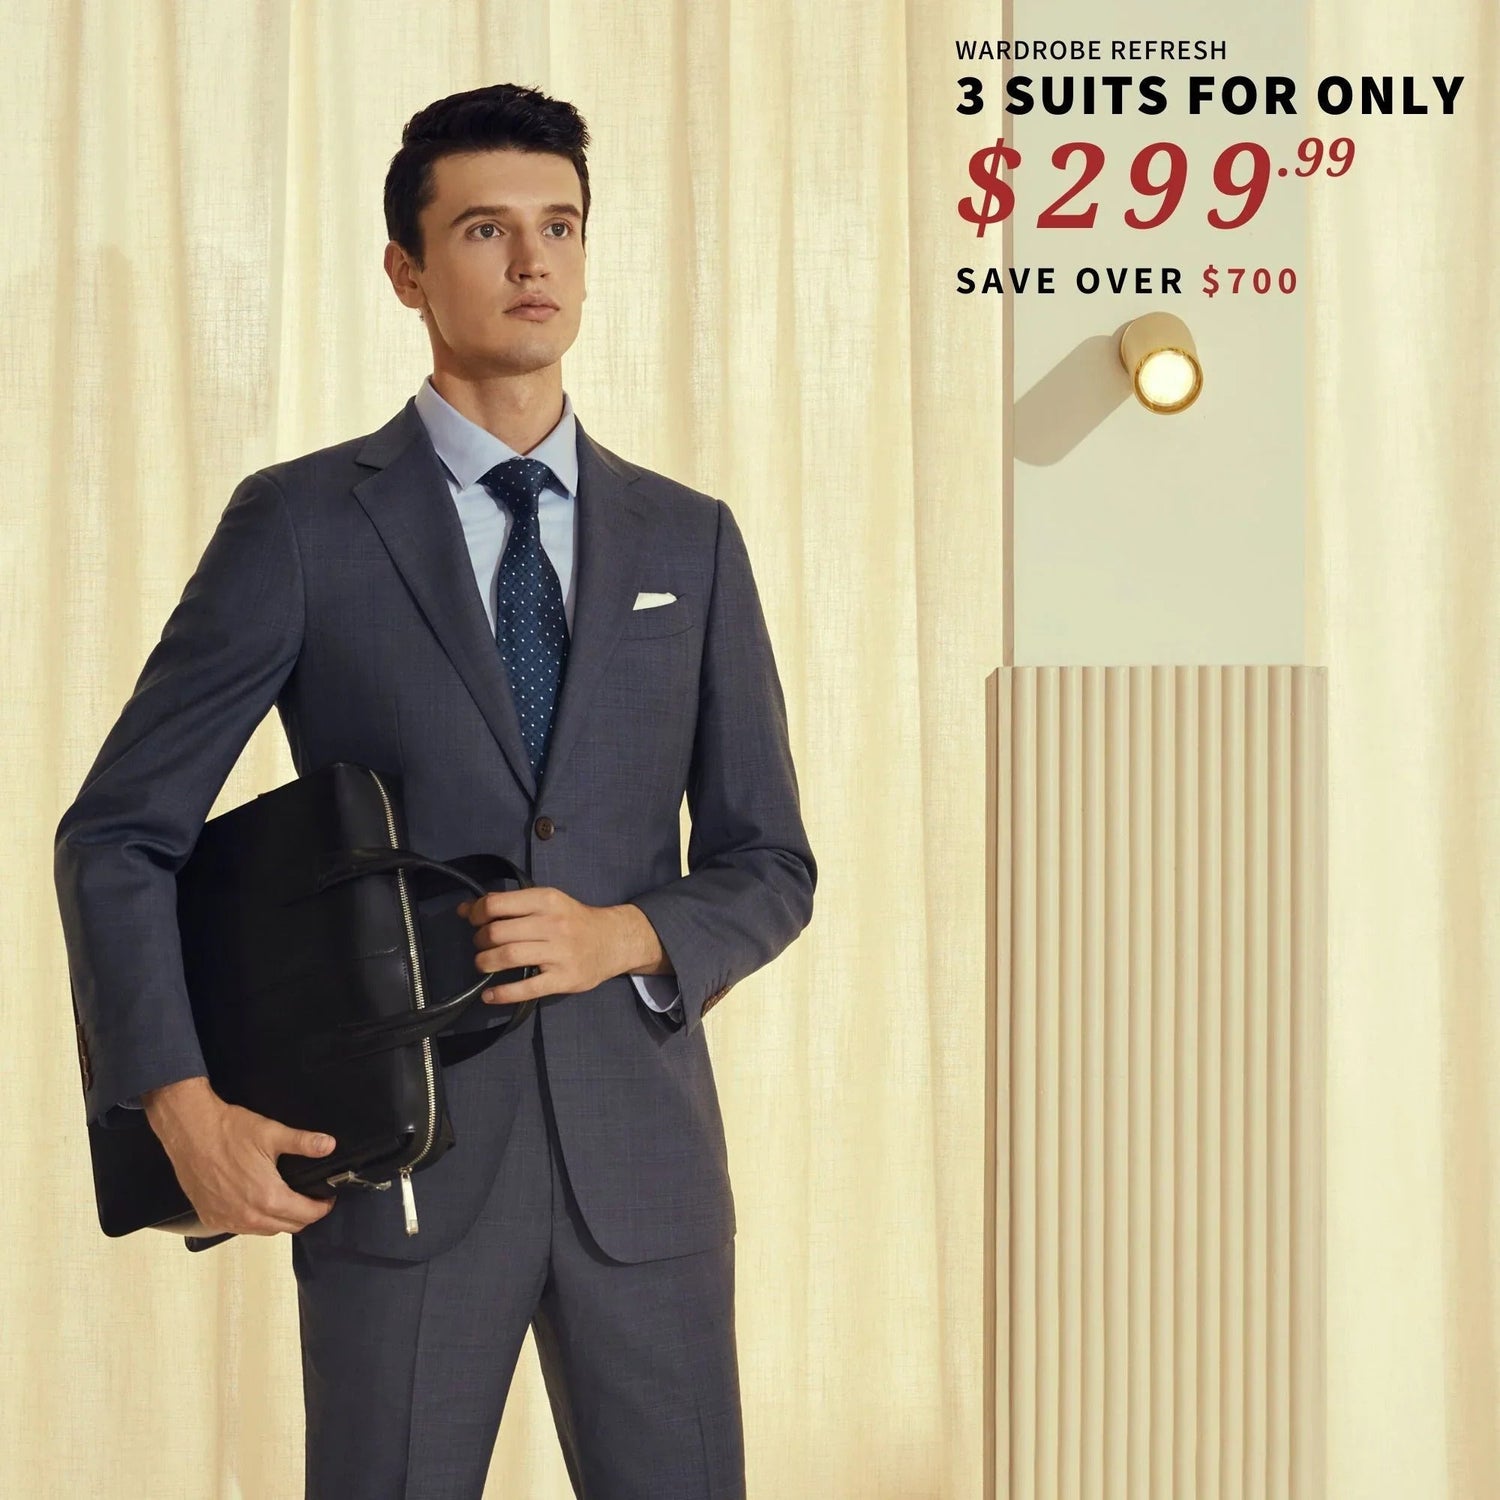 A man in 3 suits for $299 from BYOB holding a briefcase.